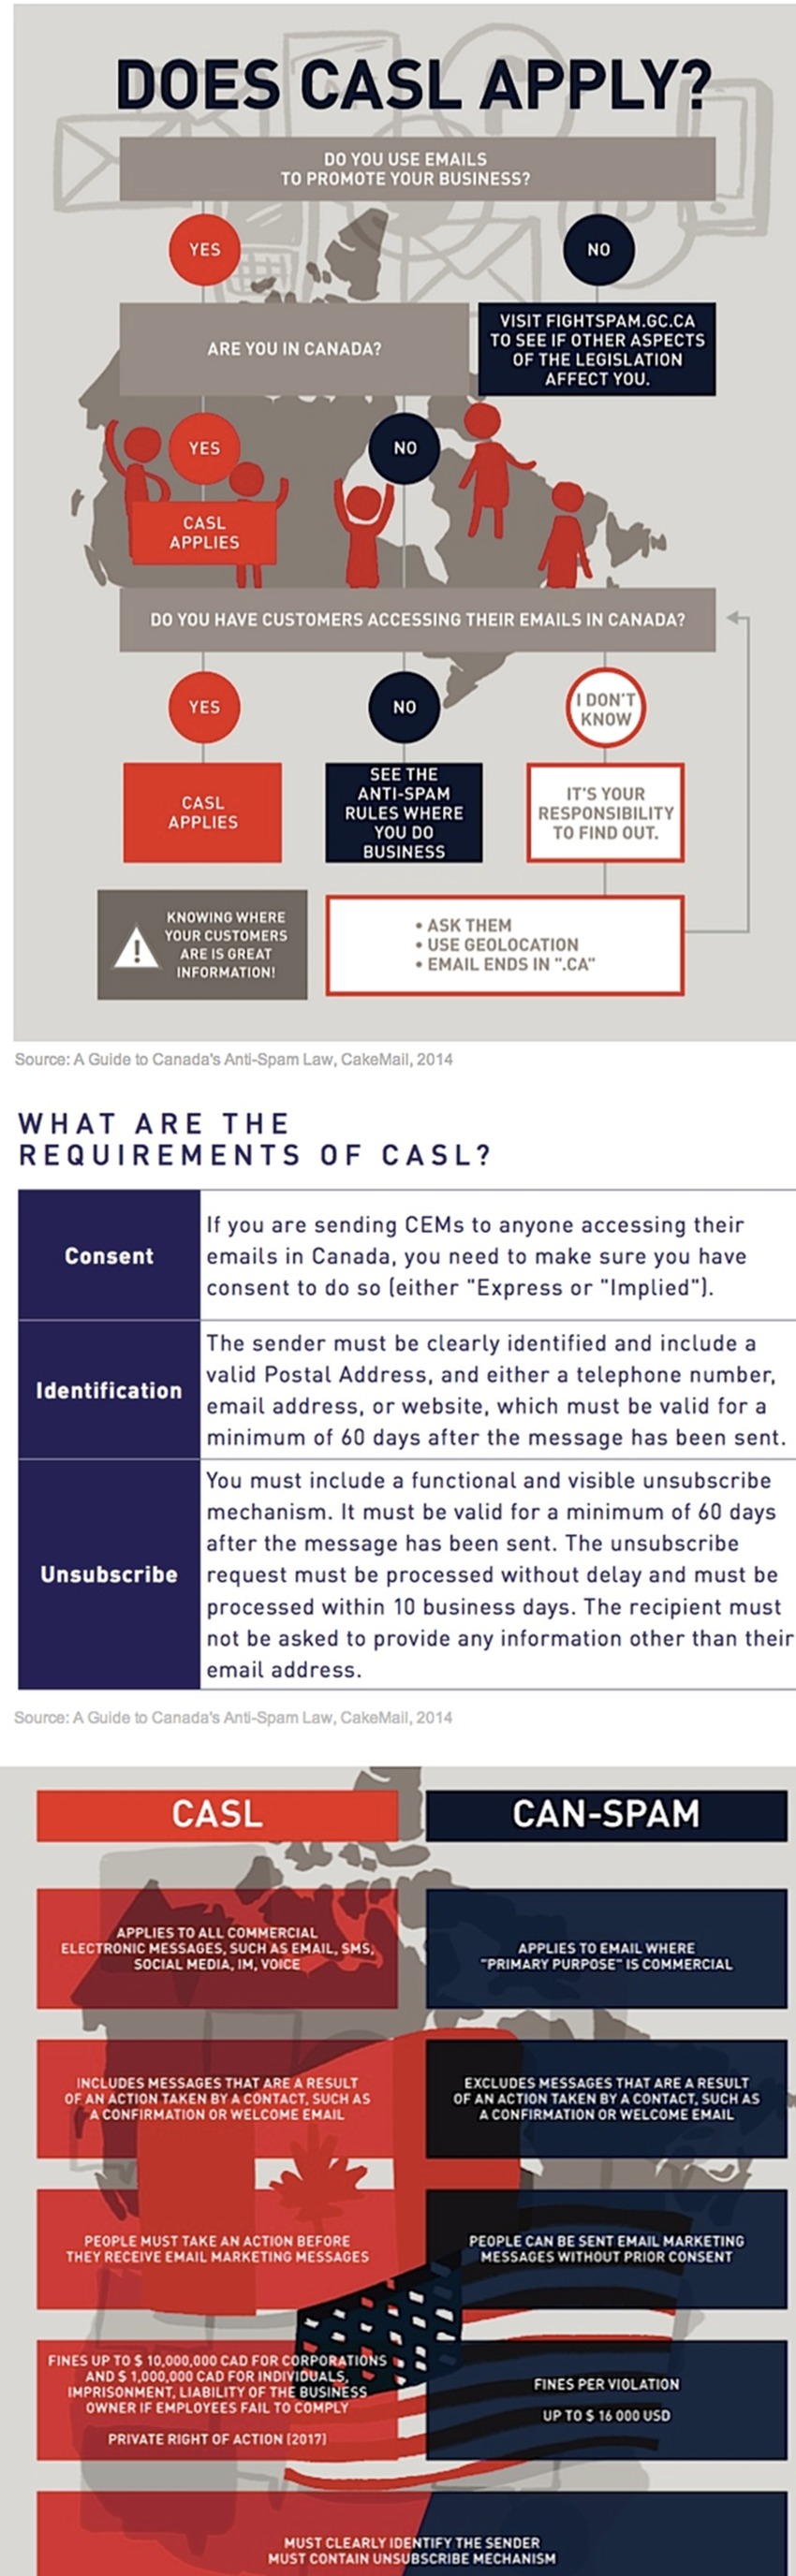 How Canada's Anti-Spam Law Will Affect Email Marketers [Infographic] - Profs | The MarTech Digest | Scoop.it